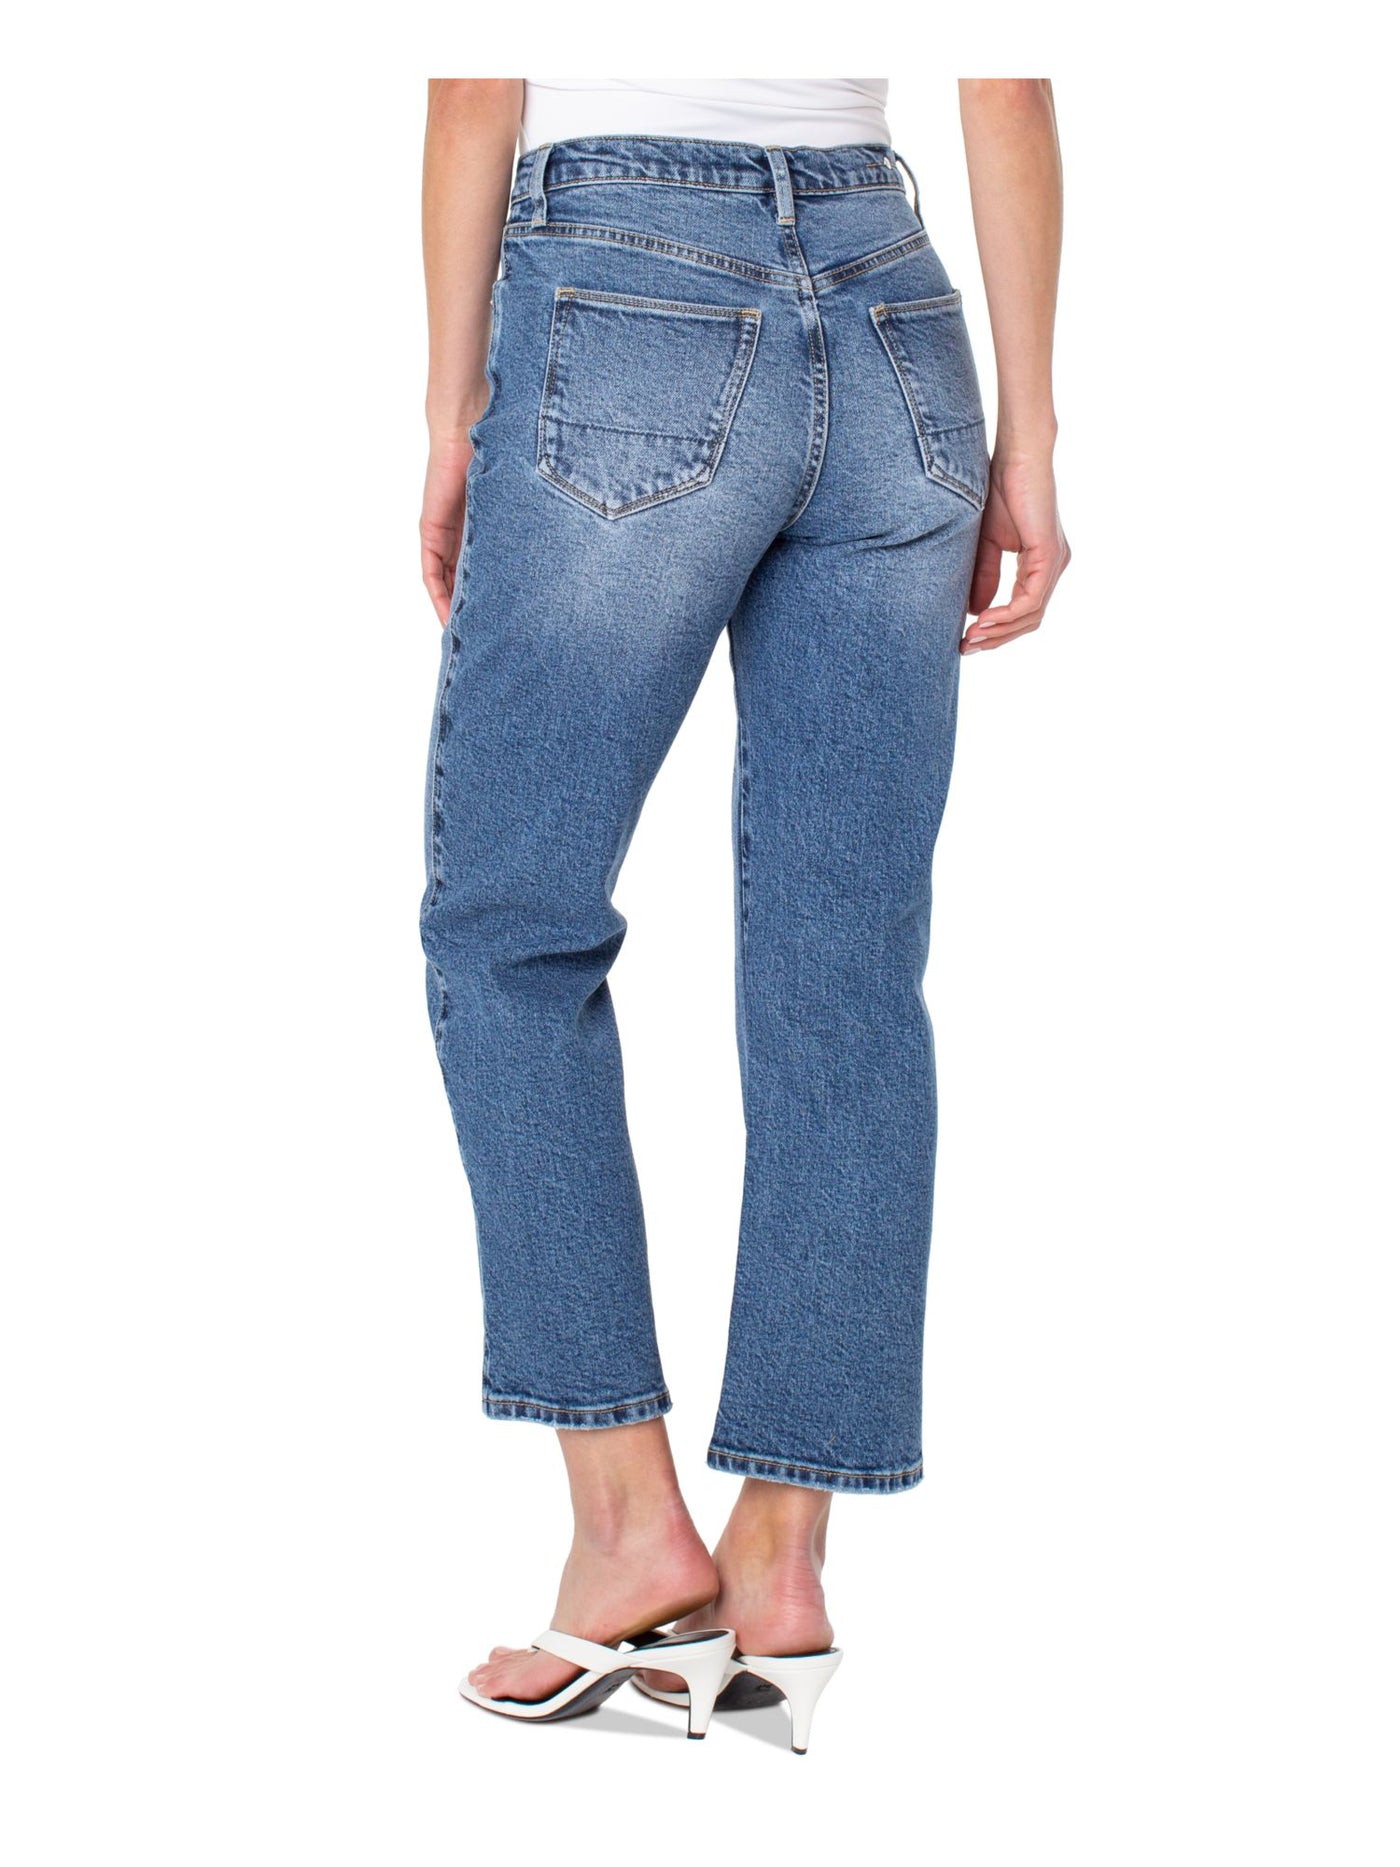 EARNEST SEWN NEW YORK Womens Blue Zippered Pocketed Slim Straight Cropped High Waist Jeans 26